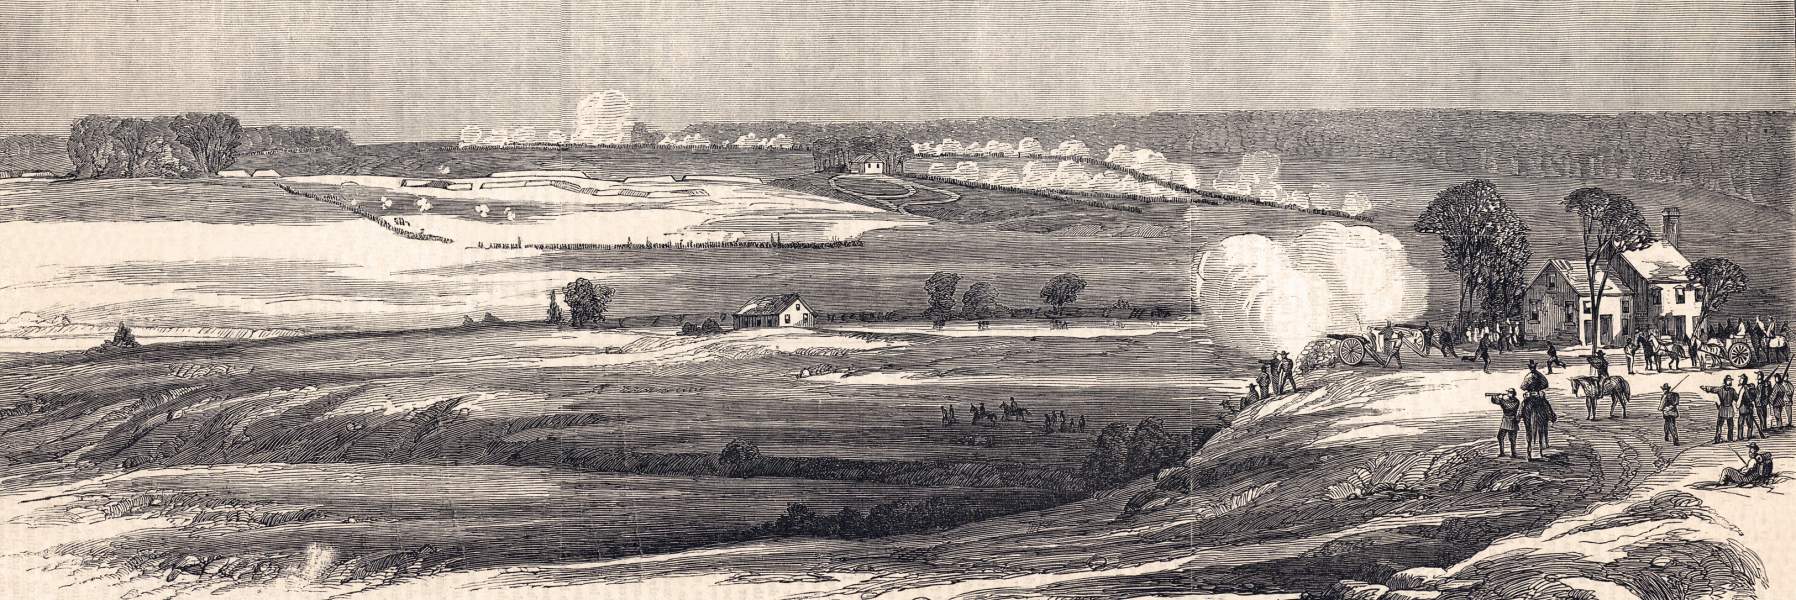 Confederate attack on General Sedgwick's VI Corps, May 4, 1863, artist's impression, zoomable image